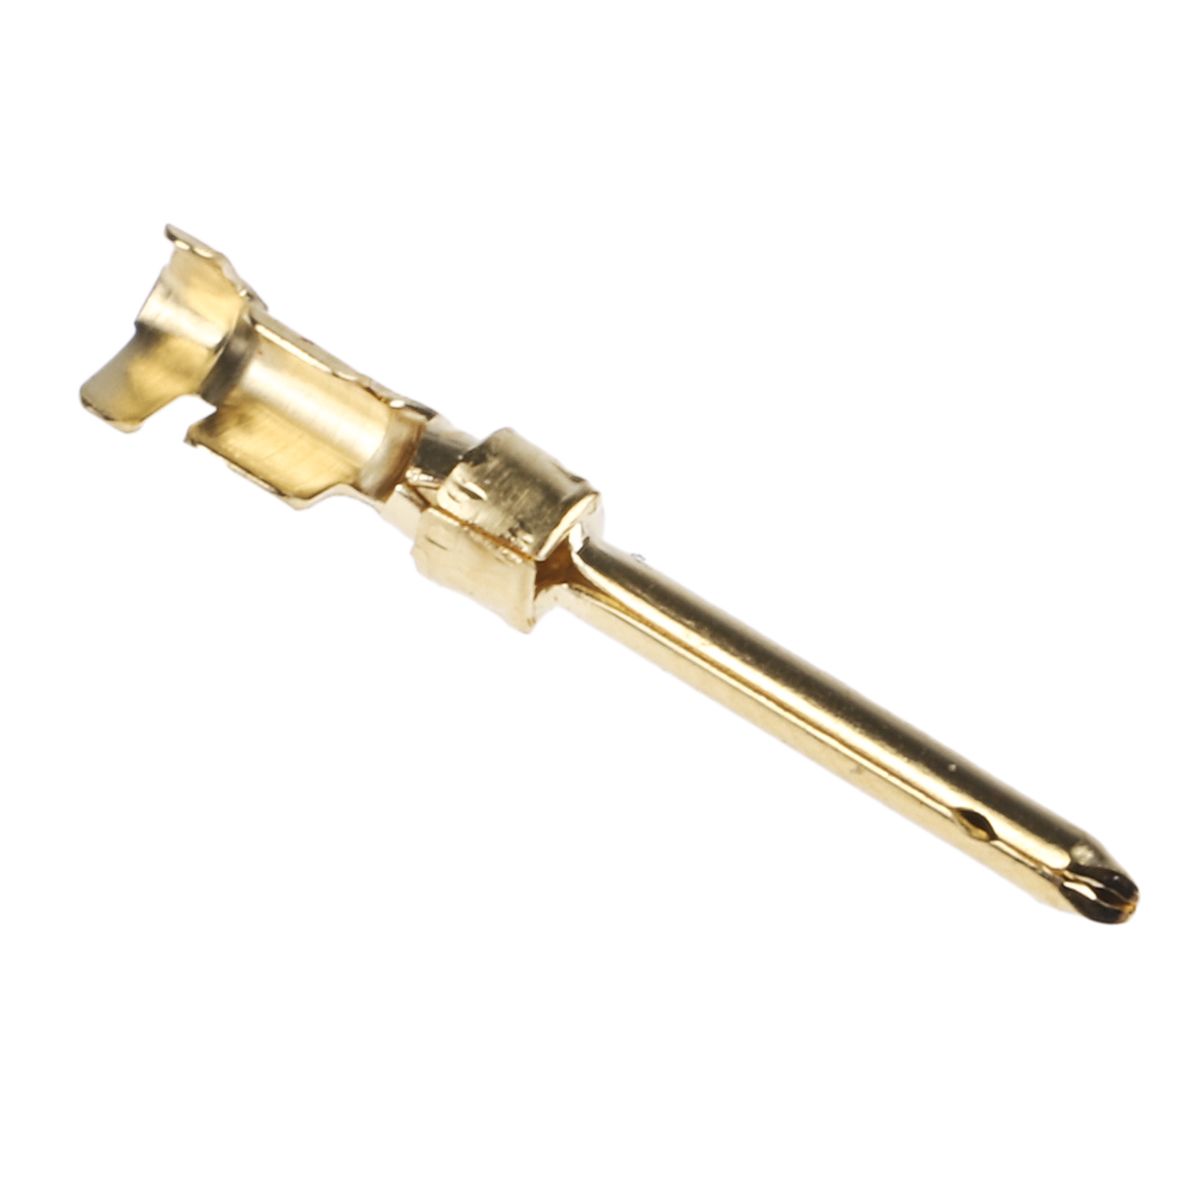 TE Connectivity, AMPLIMITE HDP-20 size 20 Male Crimp D-sub Connector Contact, Gold over Nickel Signal, 24 → 20